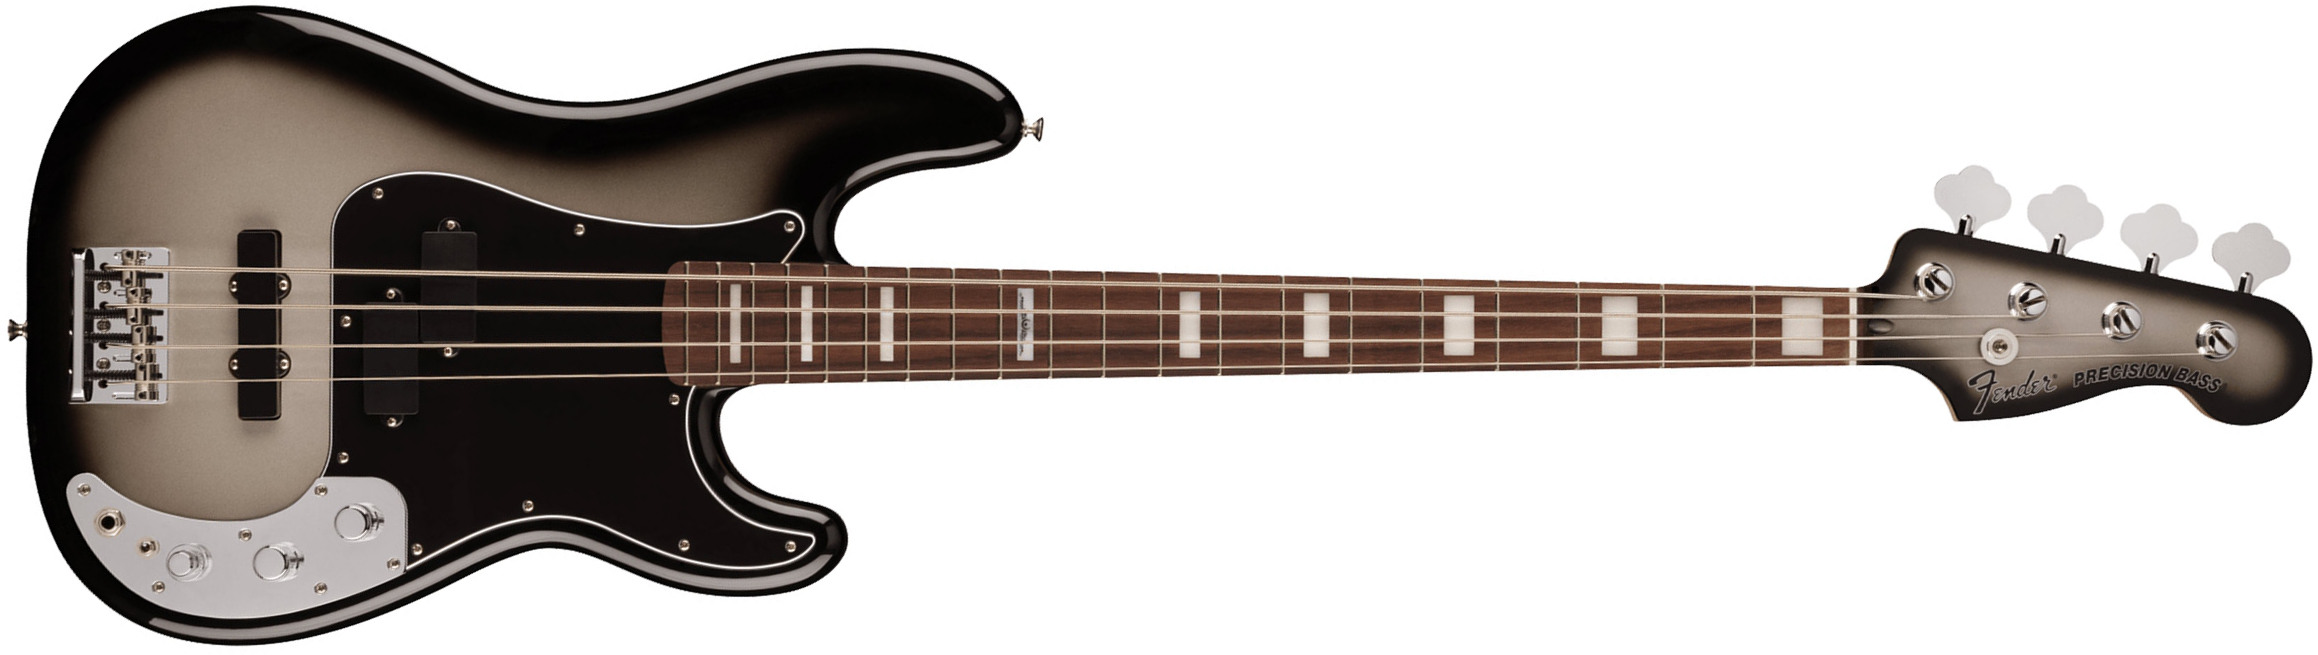 Fender Troy Sanders Precision Bass Signature Active Rw - Silverburst - Solid body electric bass - Main picture